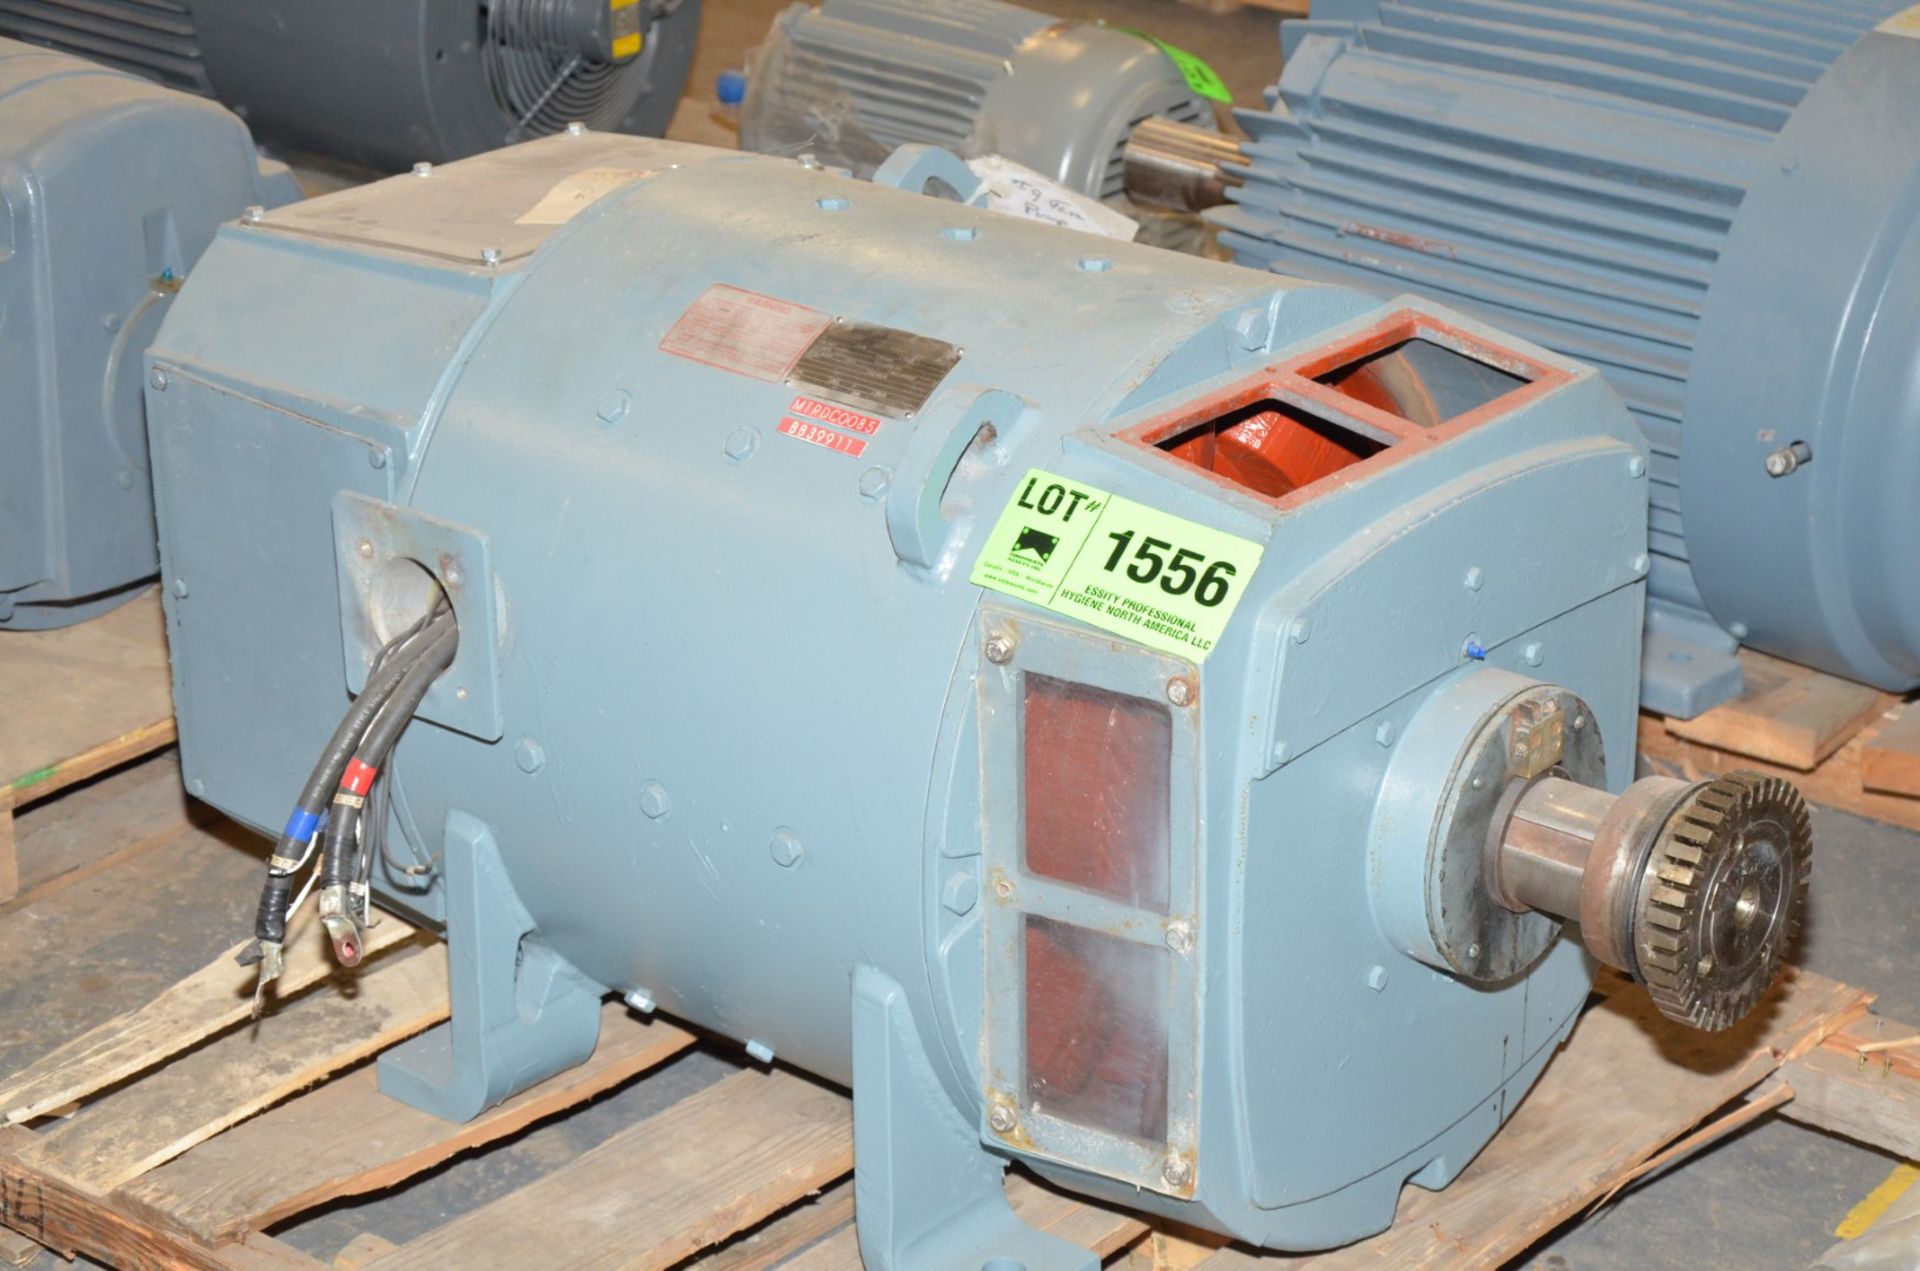 GE 150 HP 1700 RPM ELECTRIC MOTOR [RIGGING FEE FOR LOT #1556 - $50 USD PLUS APPLICABLE TAXES]